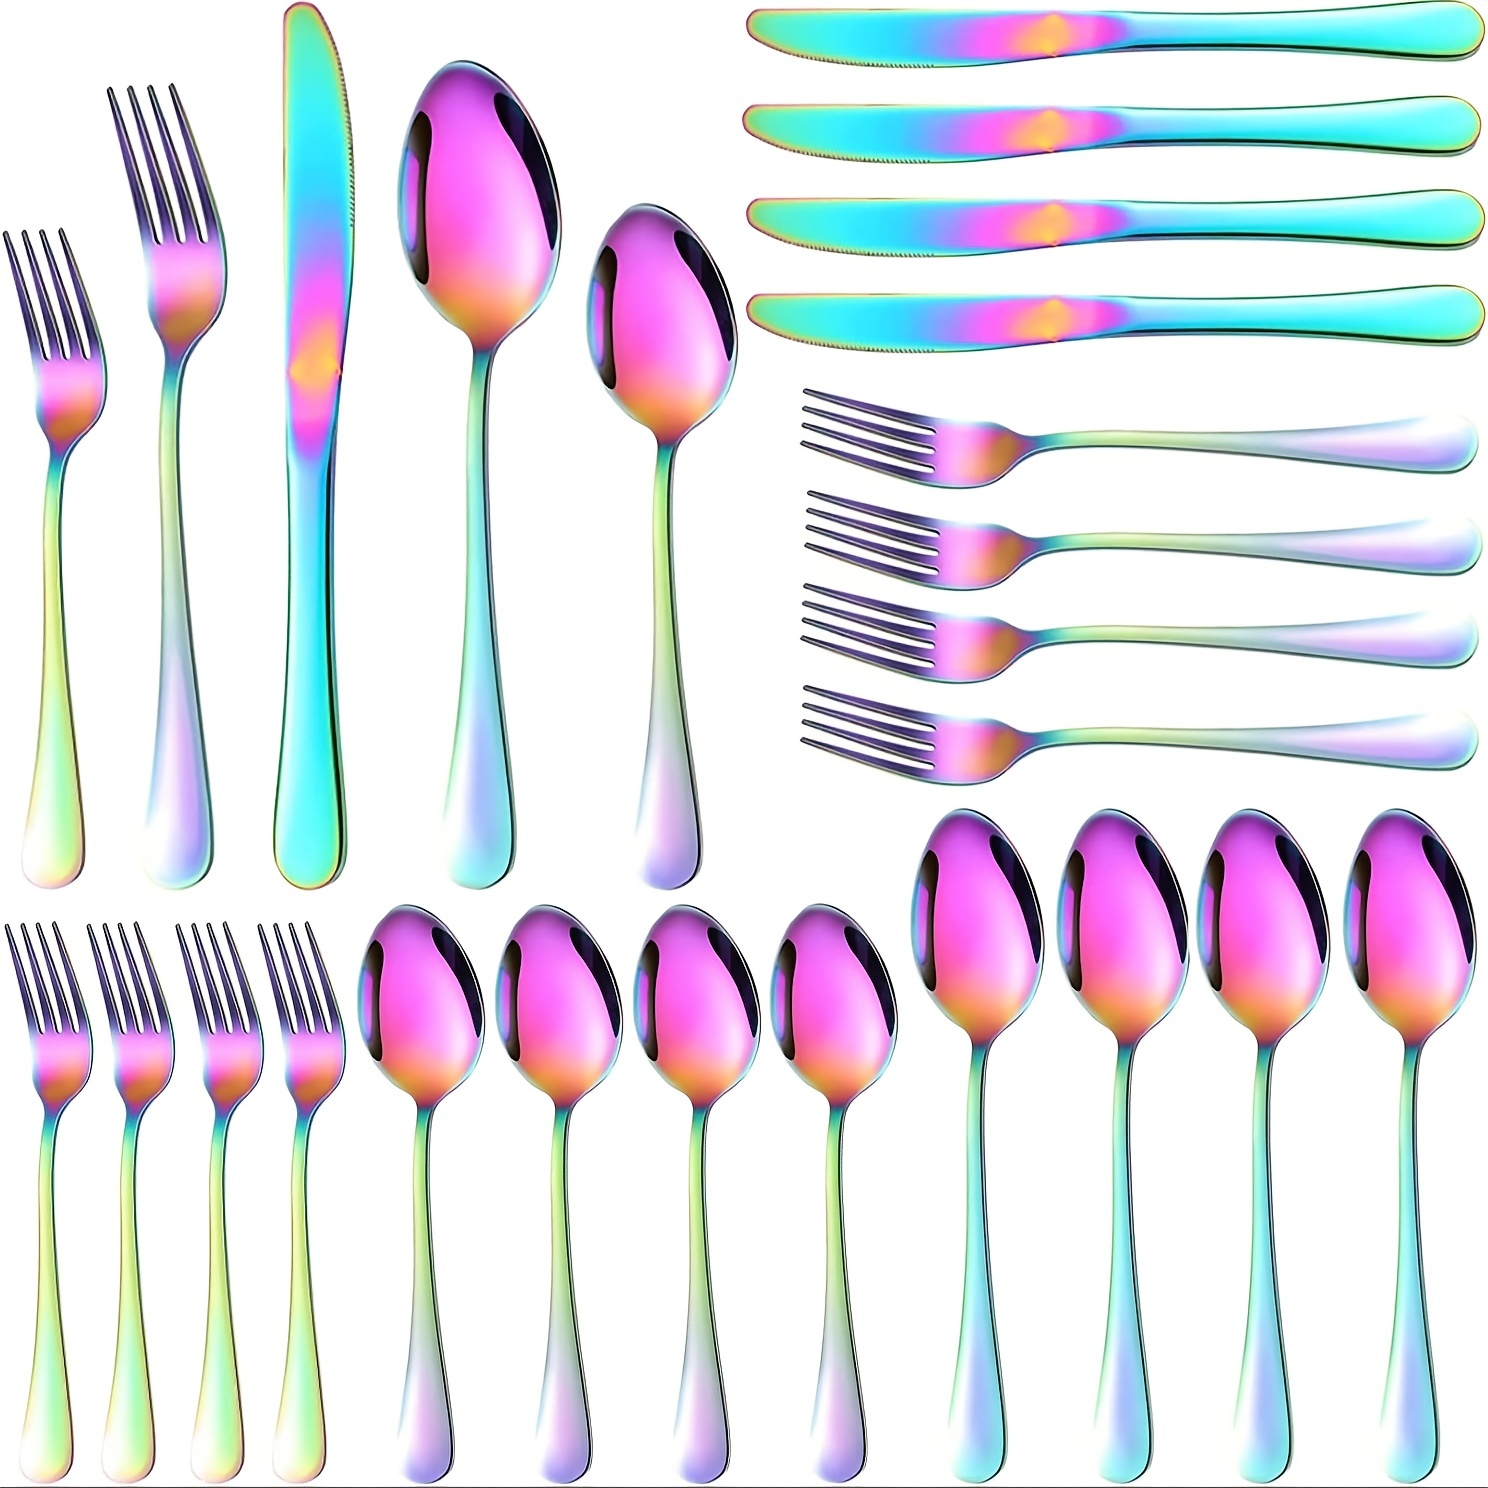 

20 Piece Set Of Rainbow Silverware, 4 Piece Set, 18/0 Stainless Steel Colored Tableware Set, Mirror Polished Rainbow Tableware Set, Rainbow Silverware Set, Rainbow Spoon And Fork Set